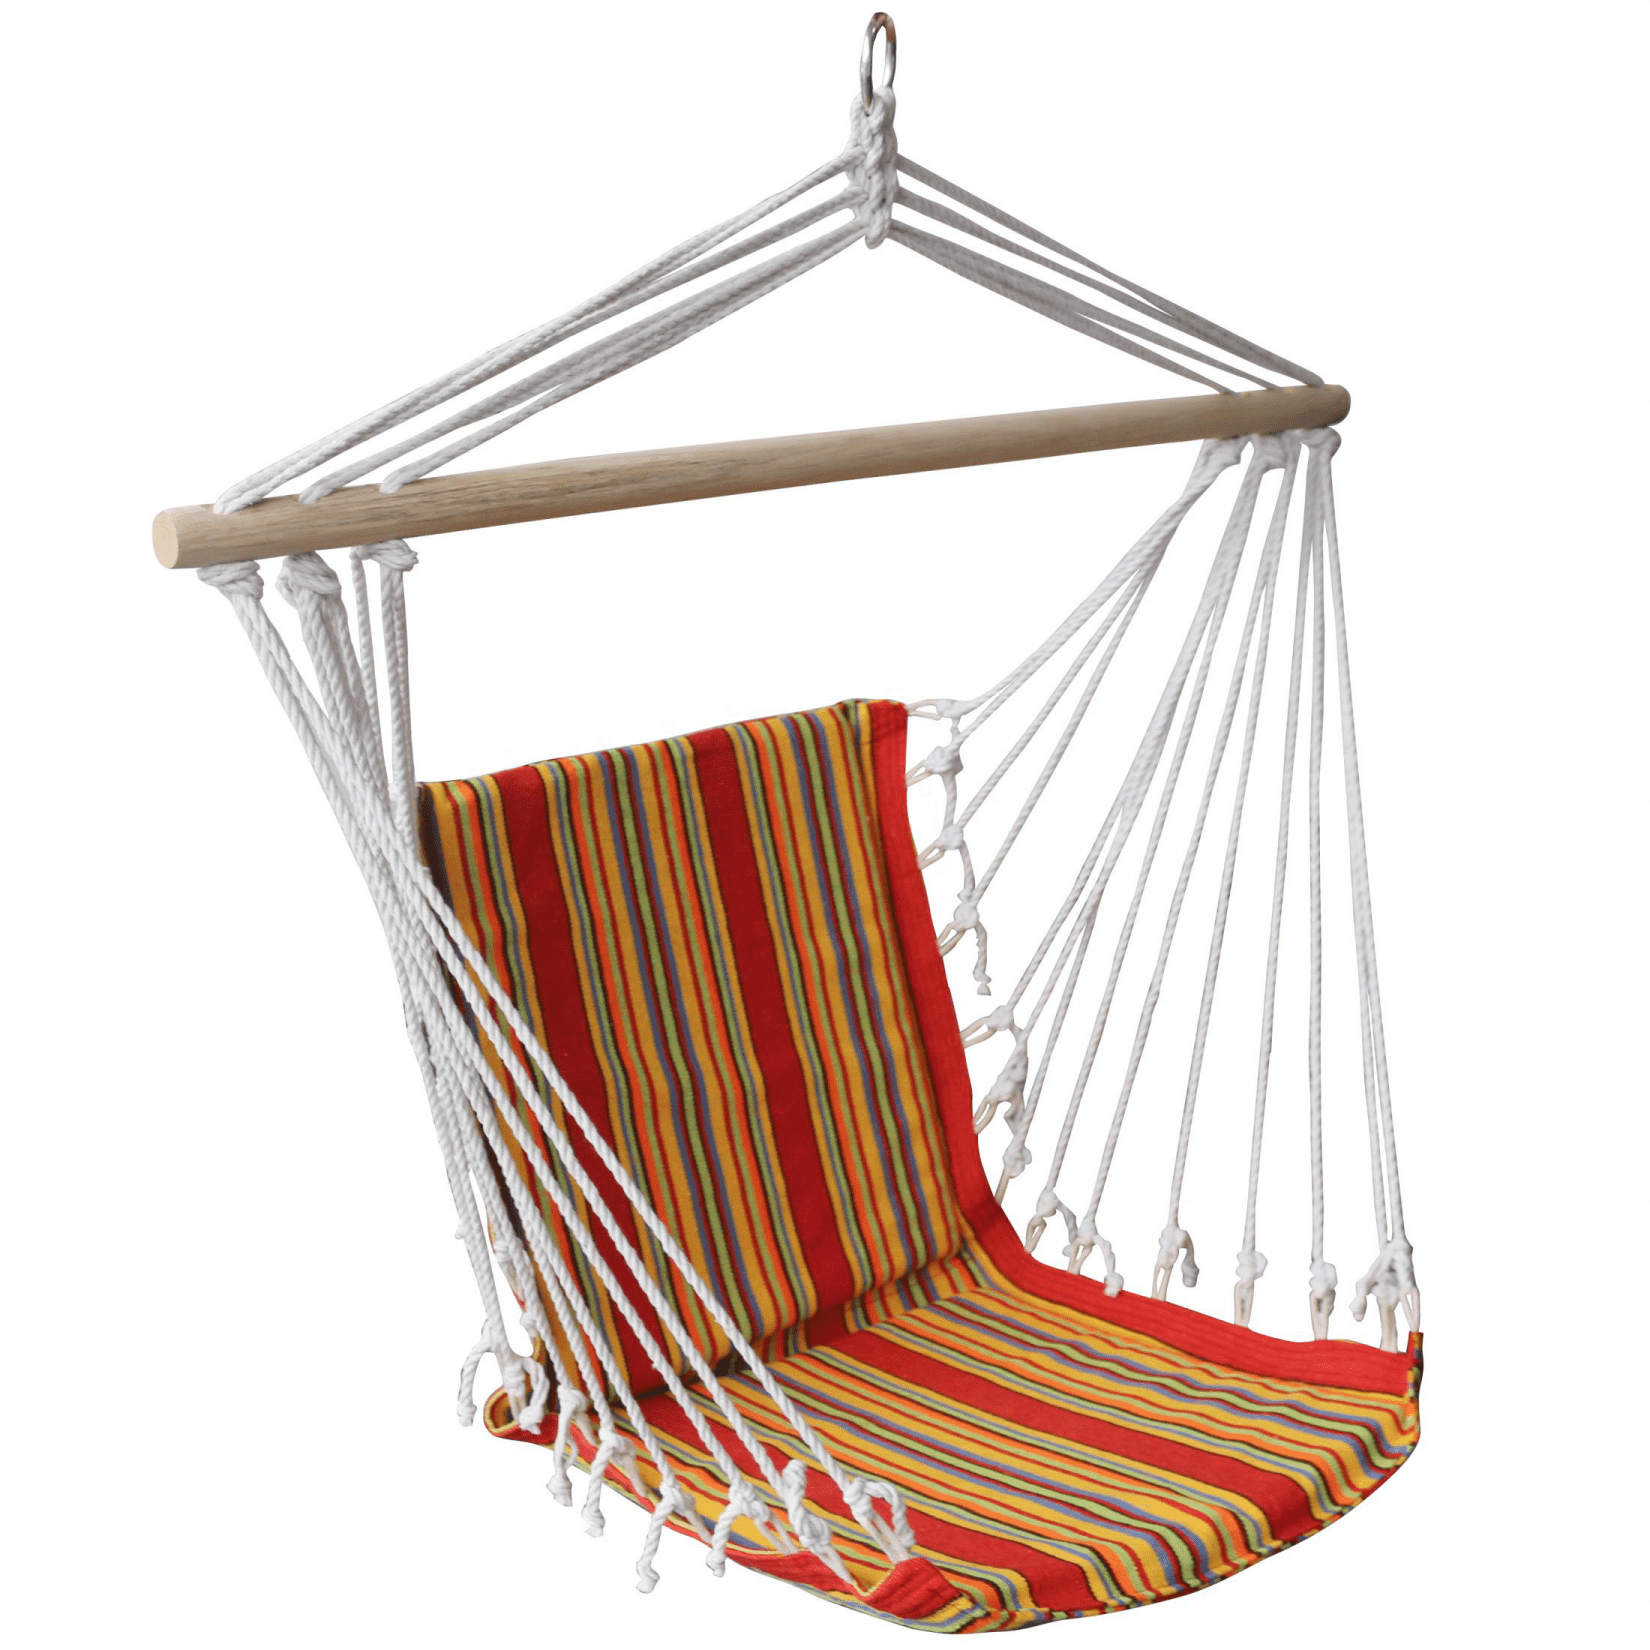 Wholesale Price Foldable Hanging Chair - Pol.ycotton hammock chair with woodbar – Top Asian